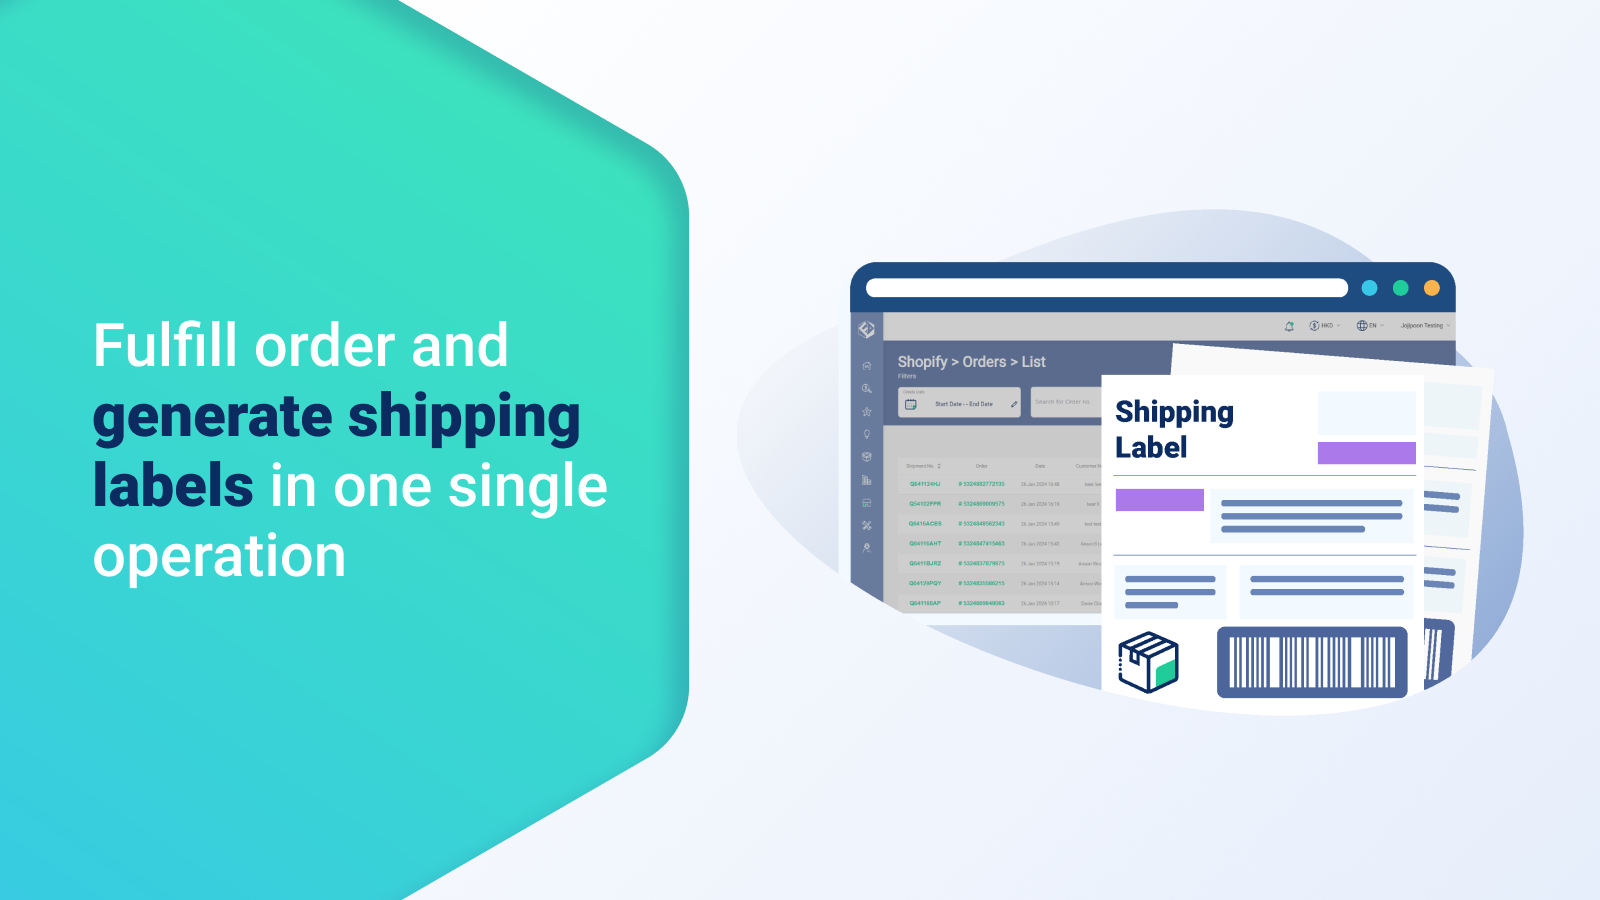 Fulfill order and generate shipping labels in single operation